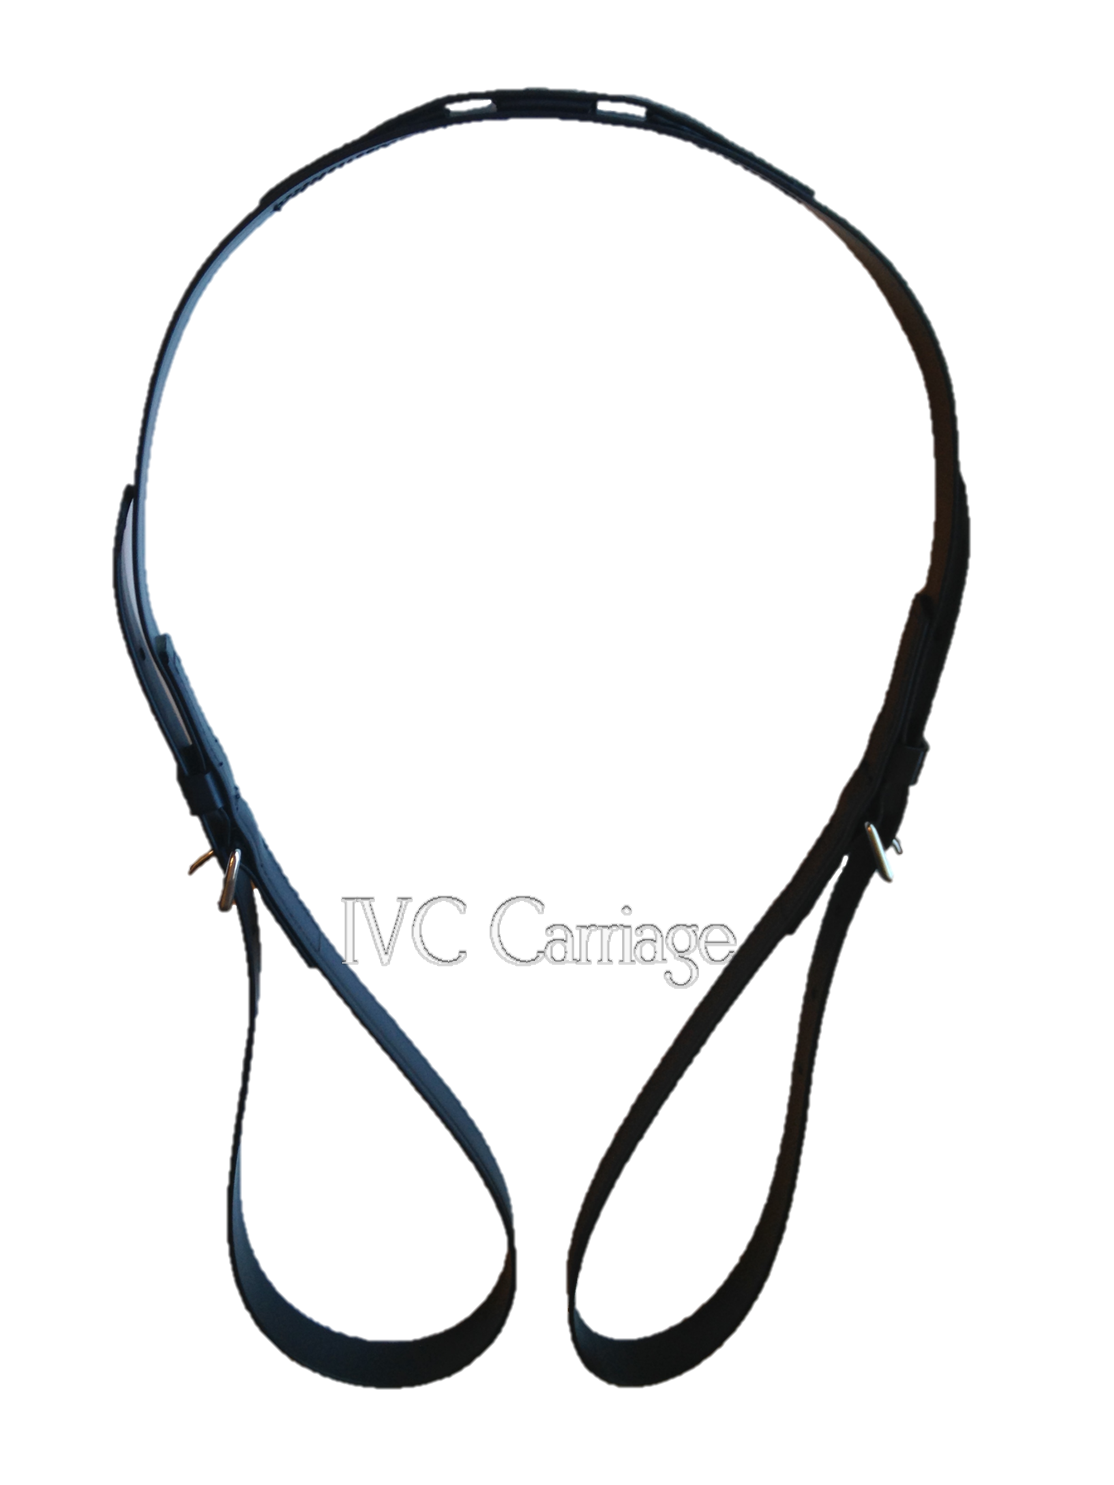 Horse Harness Kick Strap | IVC Carriage